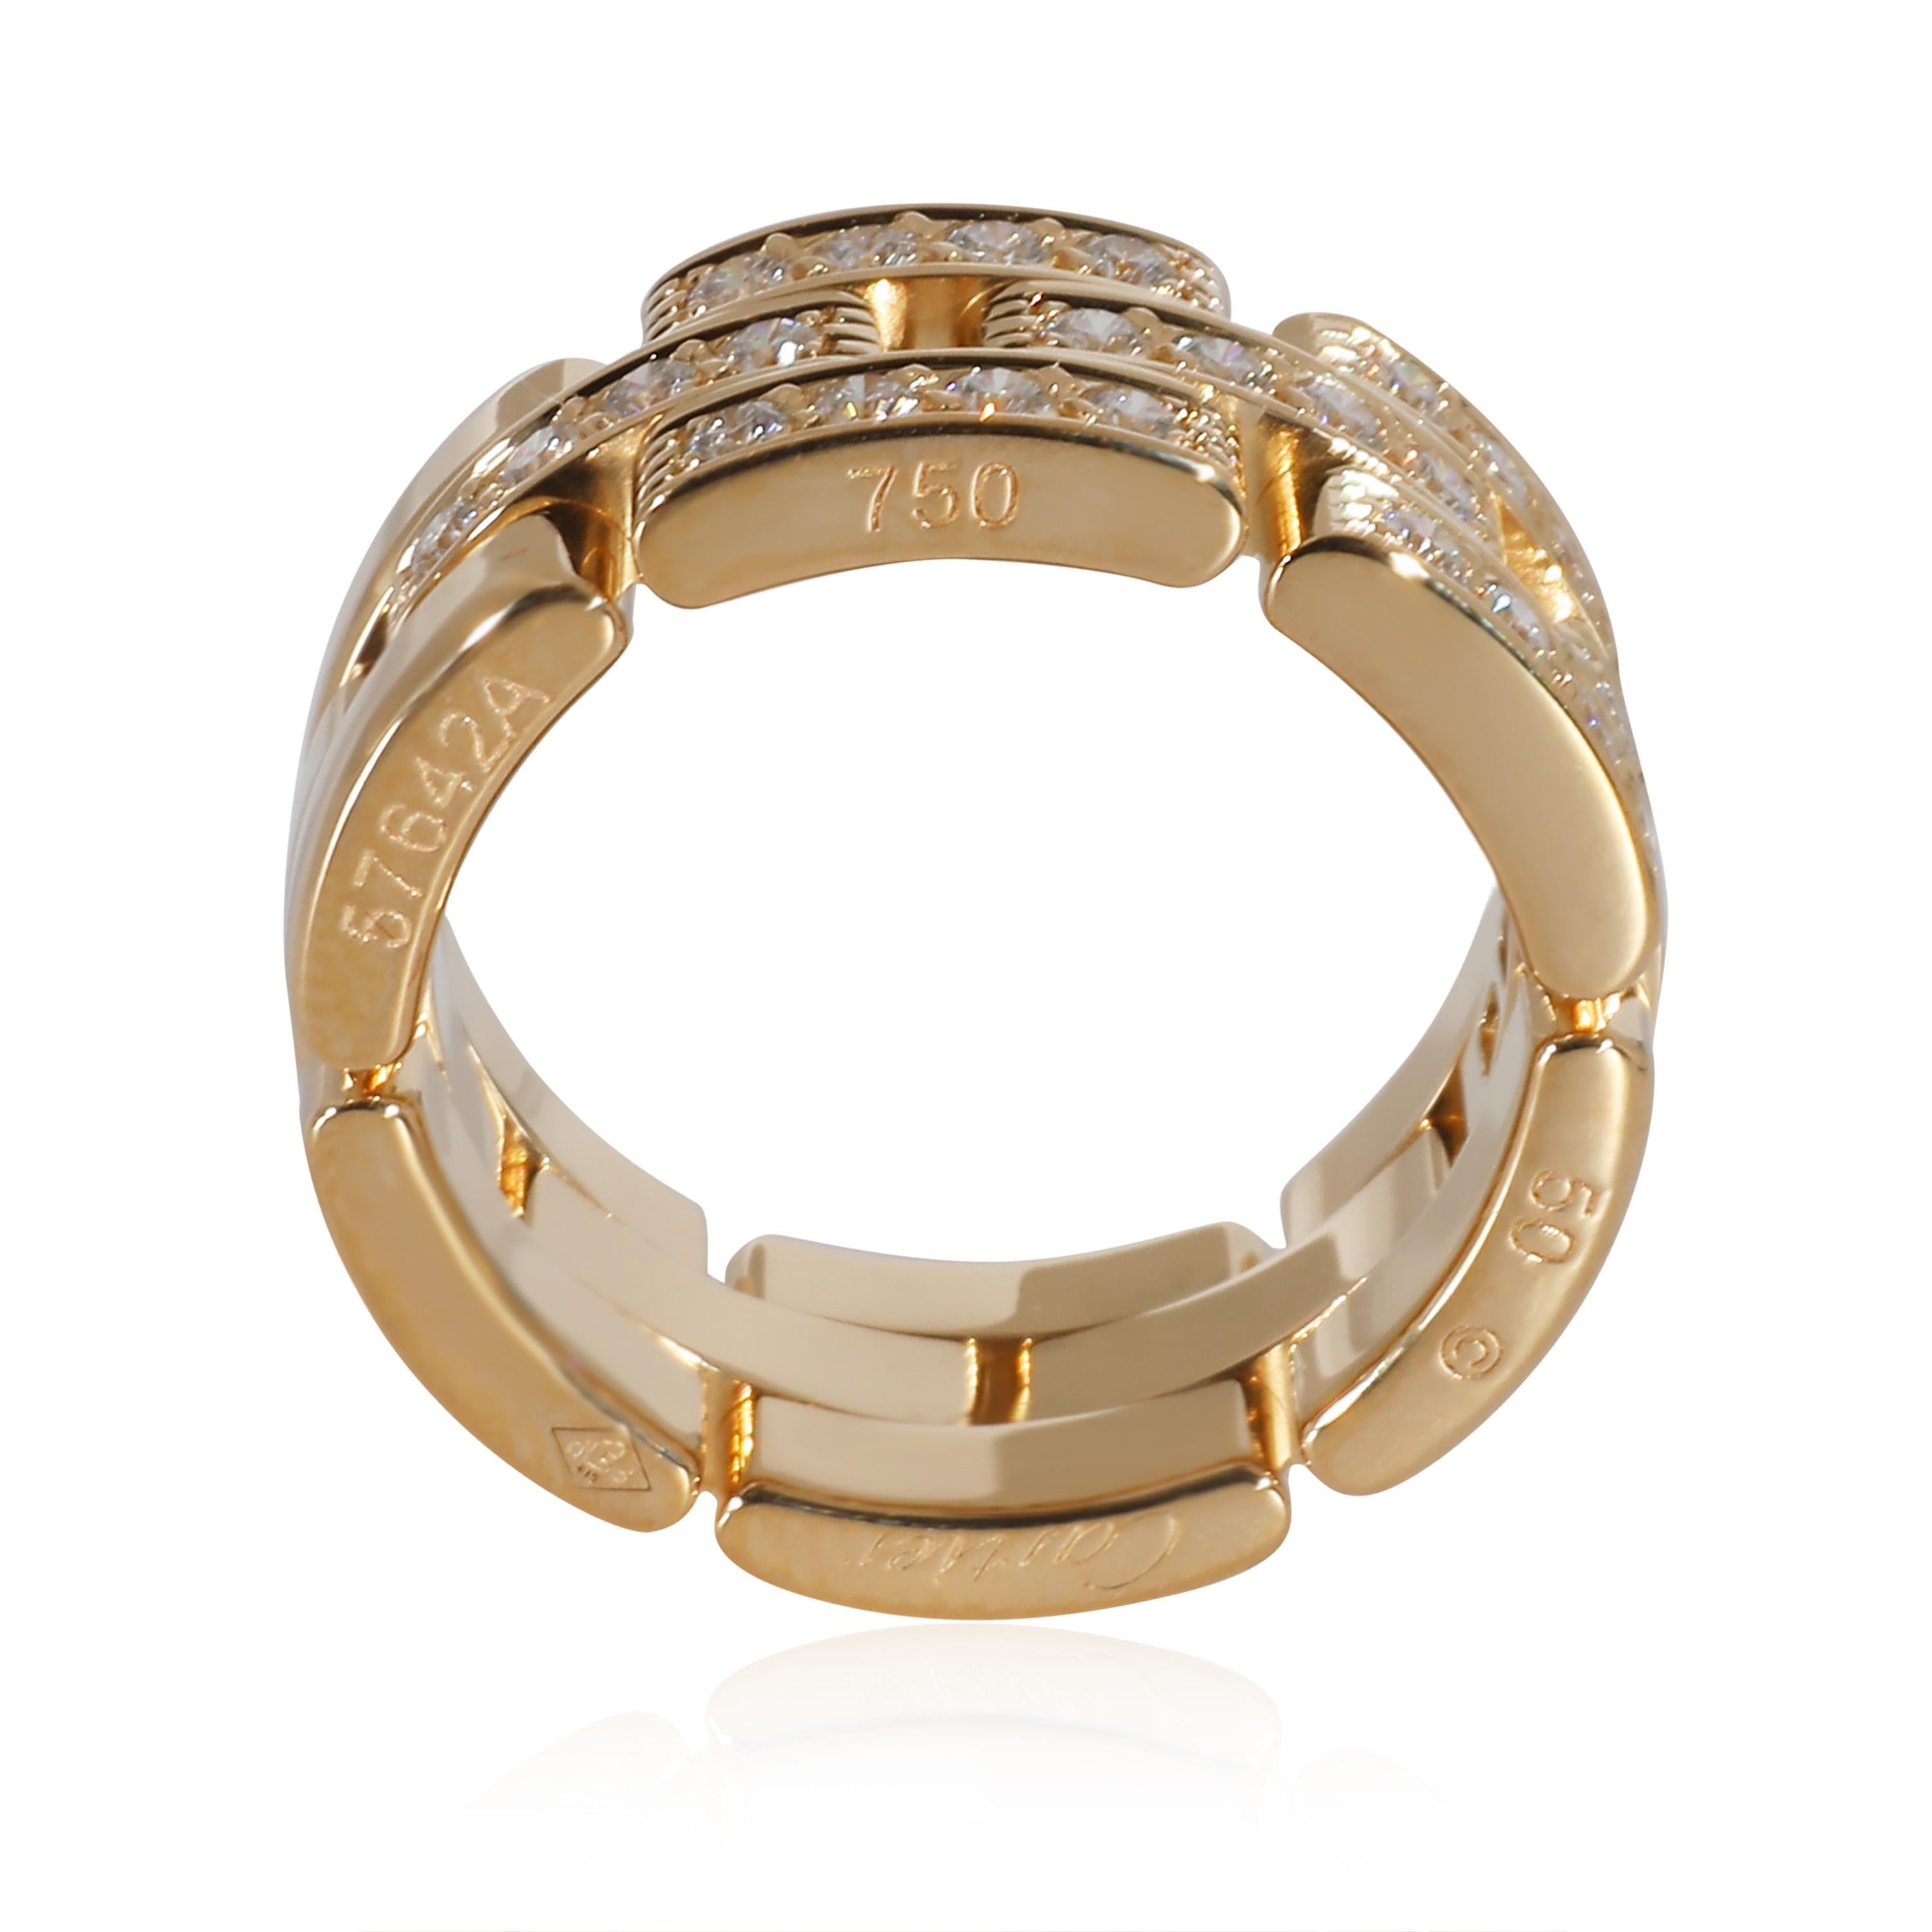 Cartier Maillon Panthere Band in 18k Yellow Gold 0.53 CTW In Excellent Condition For Sale In New York, NY